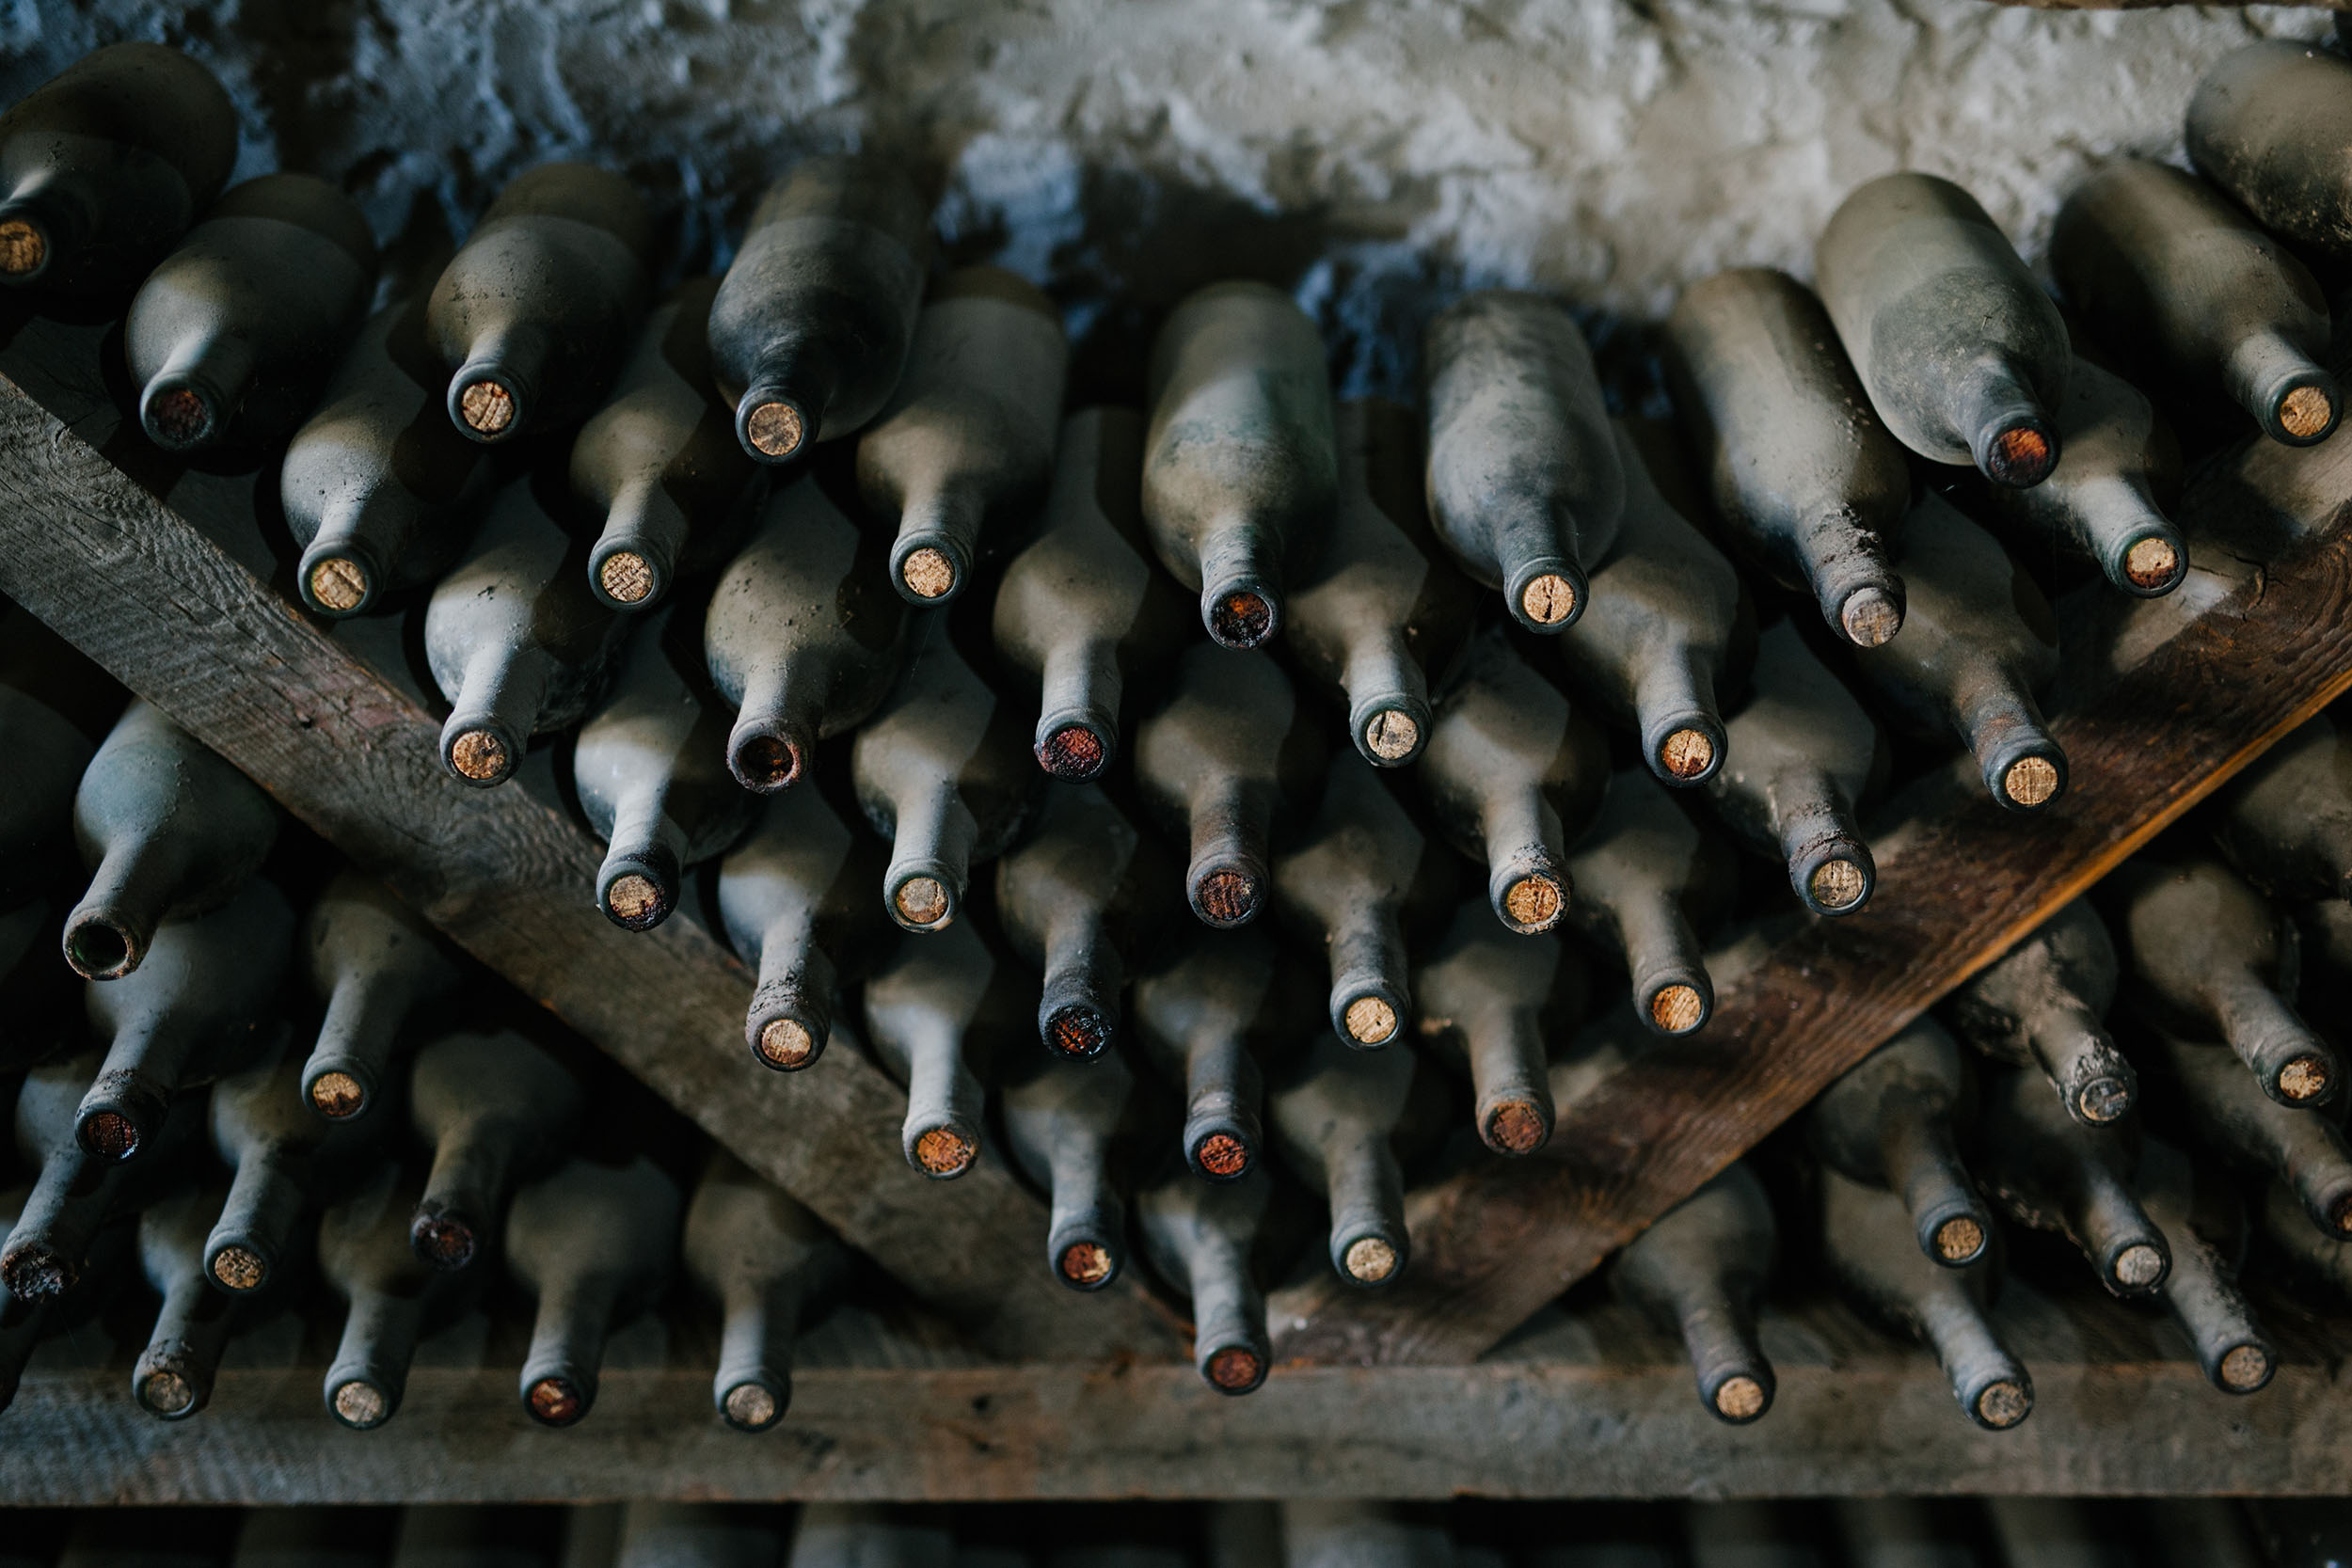 Everything you need to know about aging Barolos